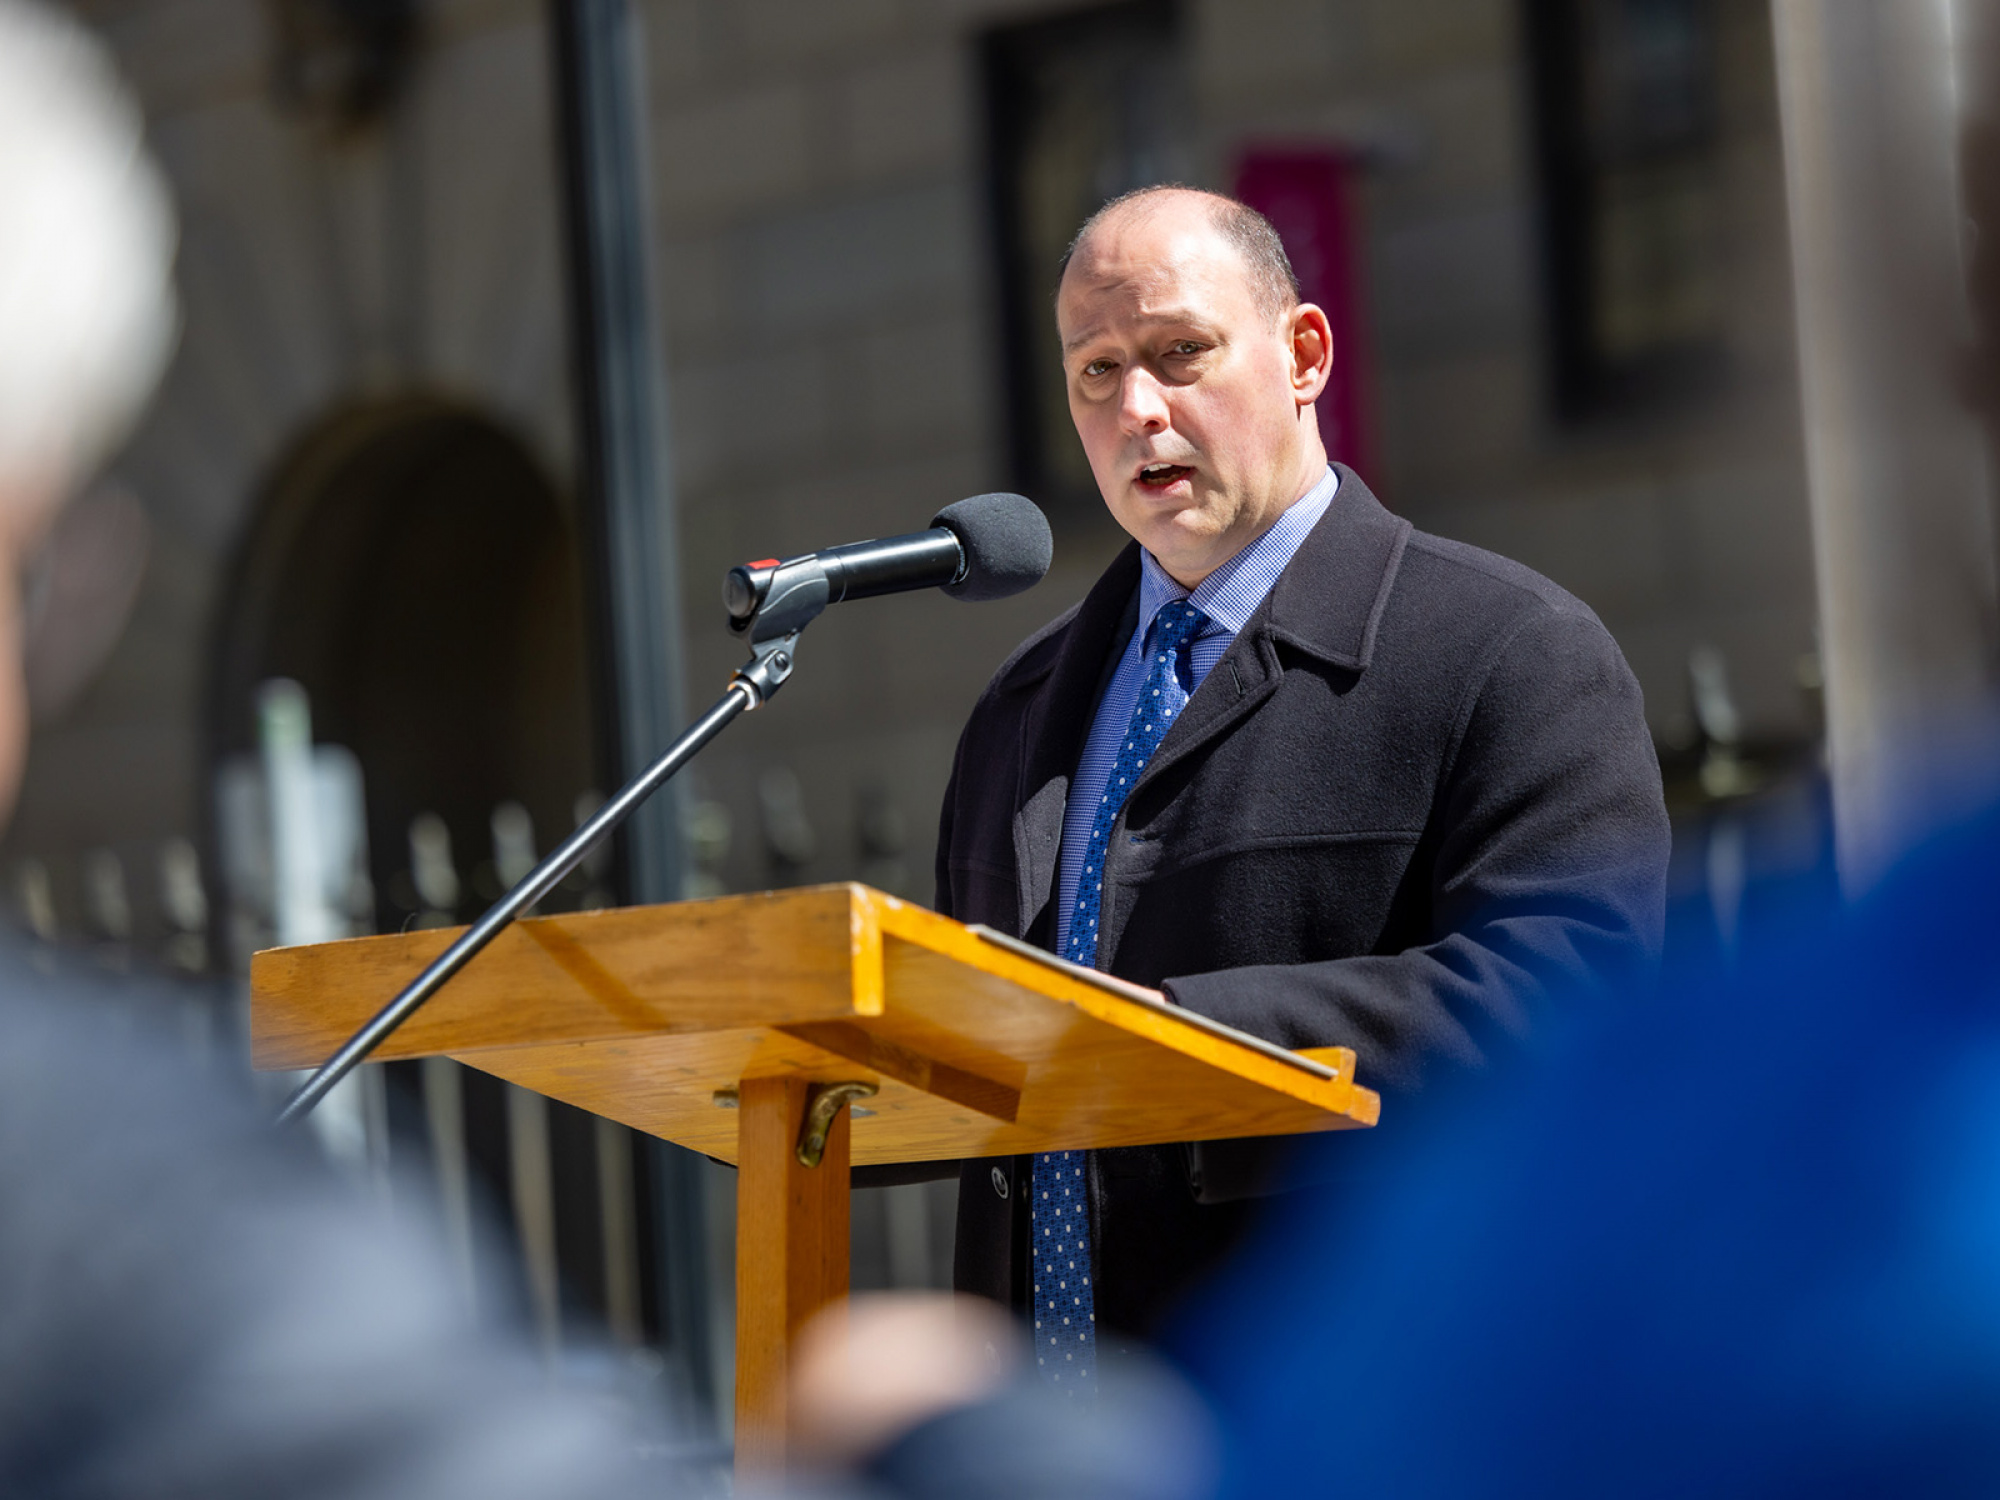 Honourable Minister Timothy Halman addresses the crowd who gathered at Province House for the National Day of Mourning. Minister Halman spoke on behalf of the Province of Nova Scotia and Minister of Labour, Skills and Immigration, Jill Balser, asking people to pause, reflect and remember those who have died at work or because of their work.